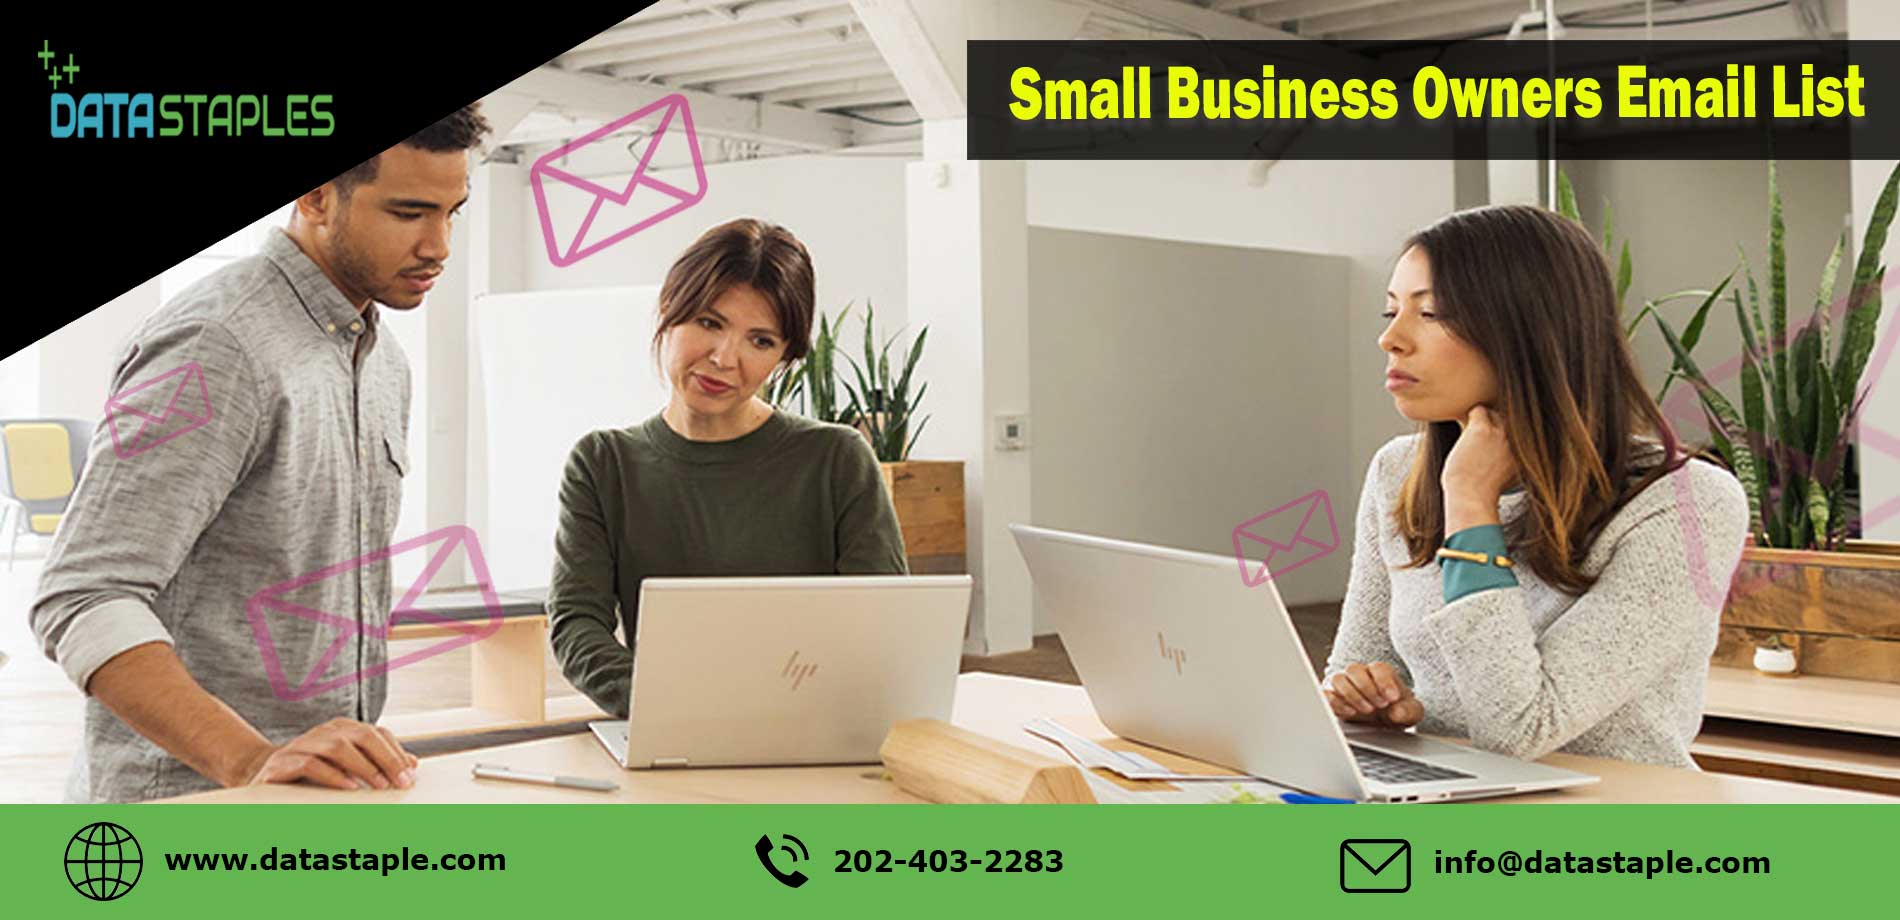 Small Business Owners Email List | DataStaples